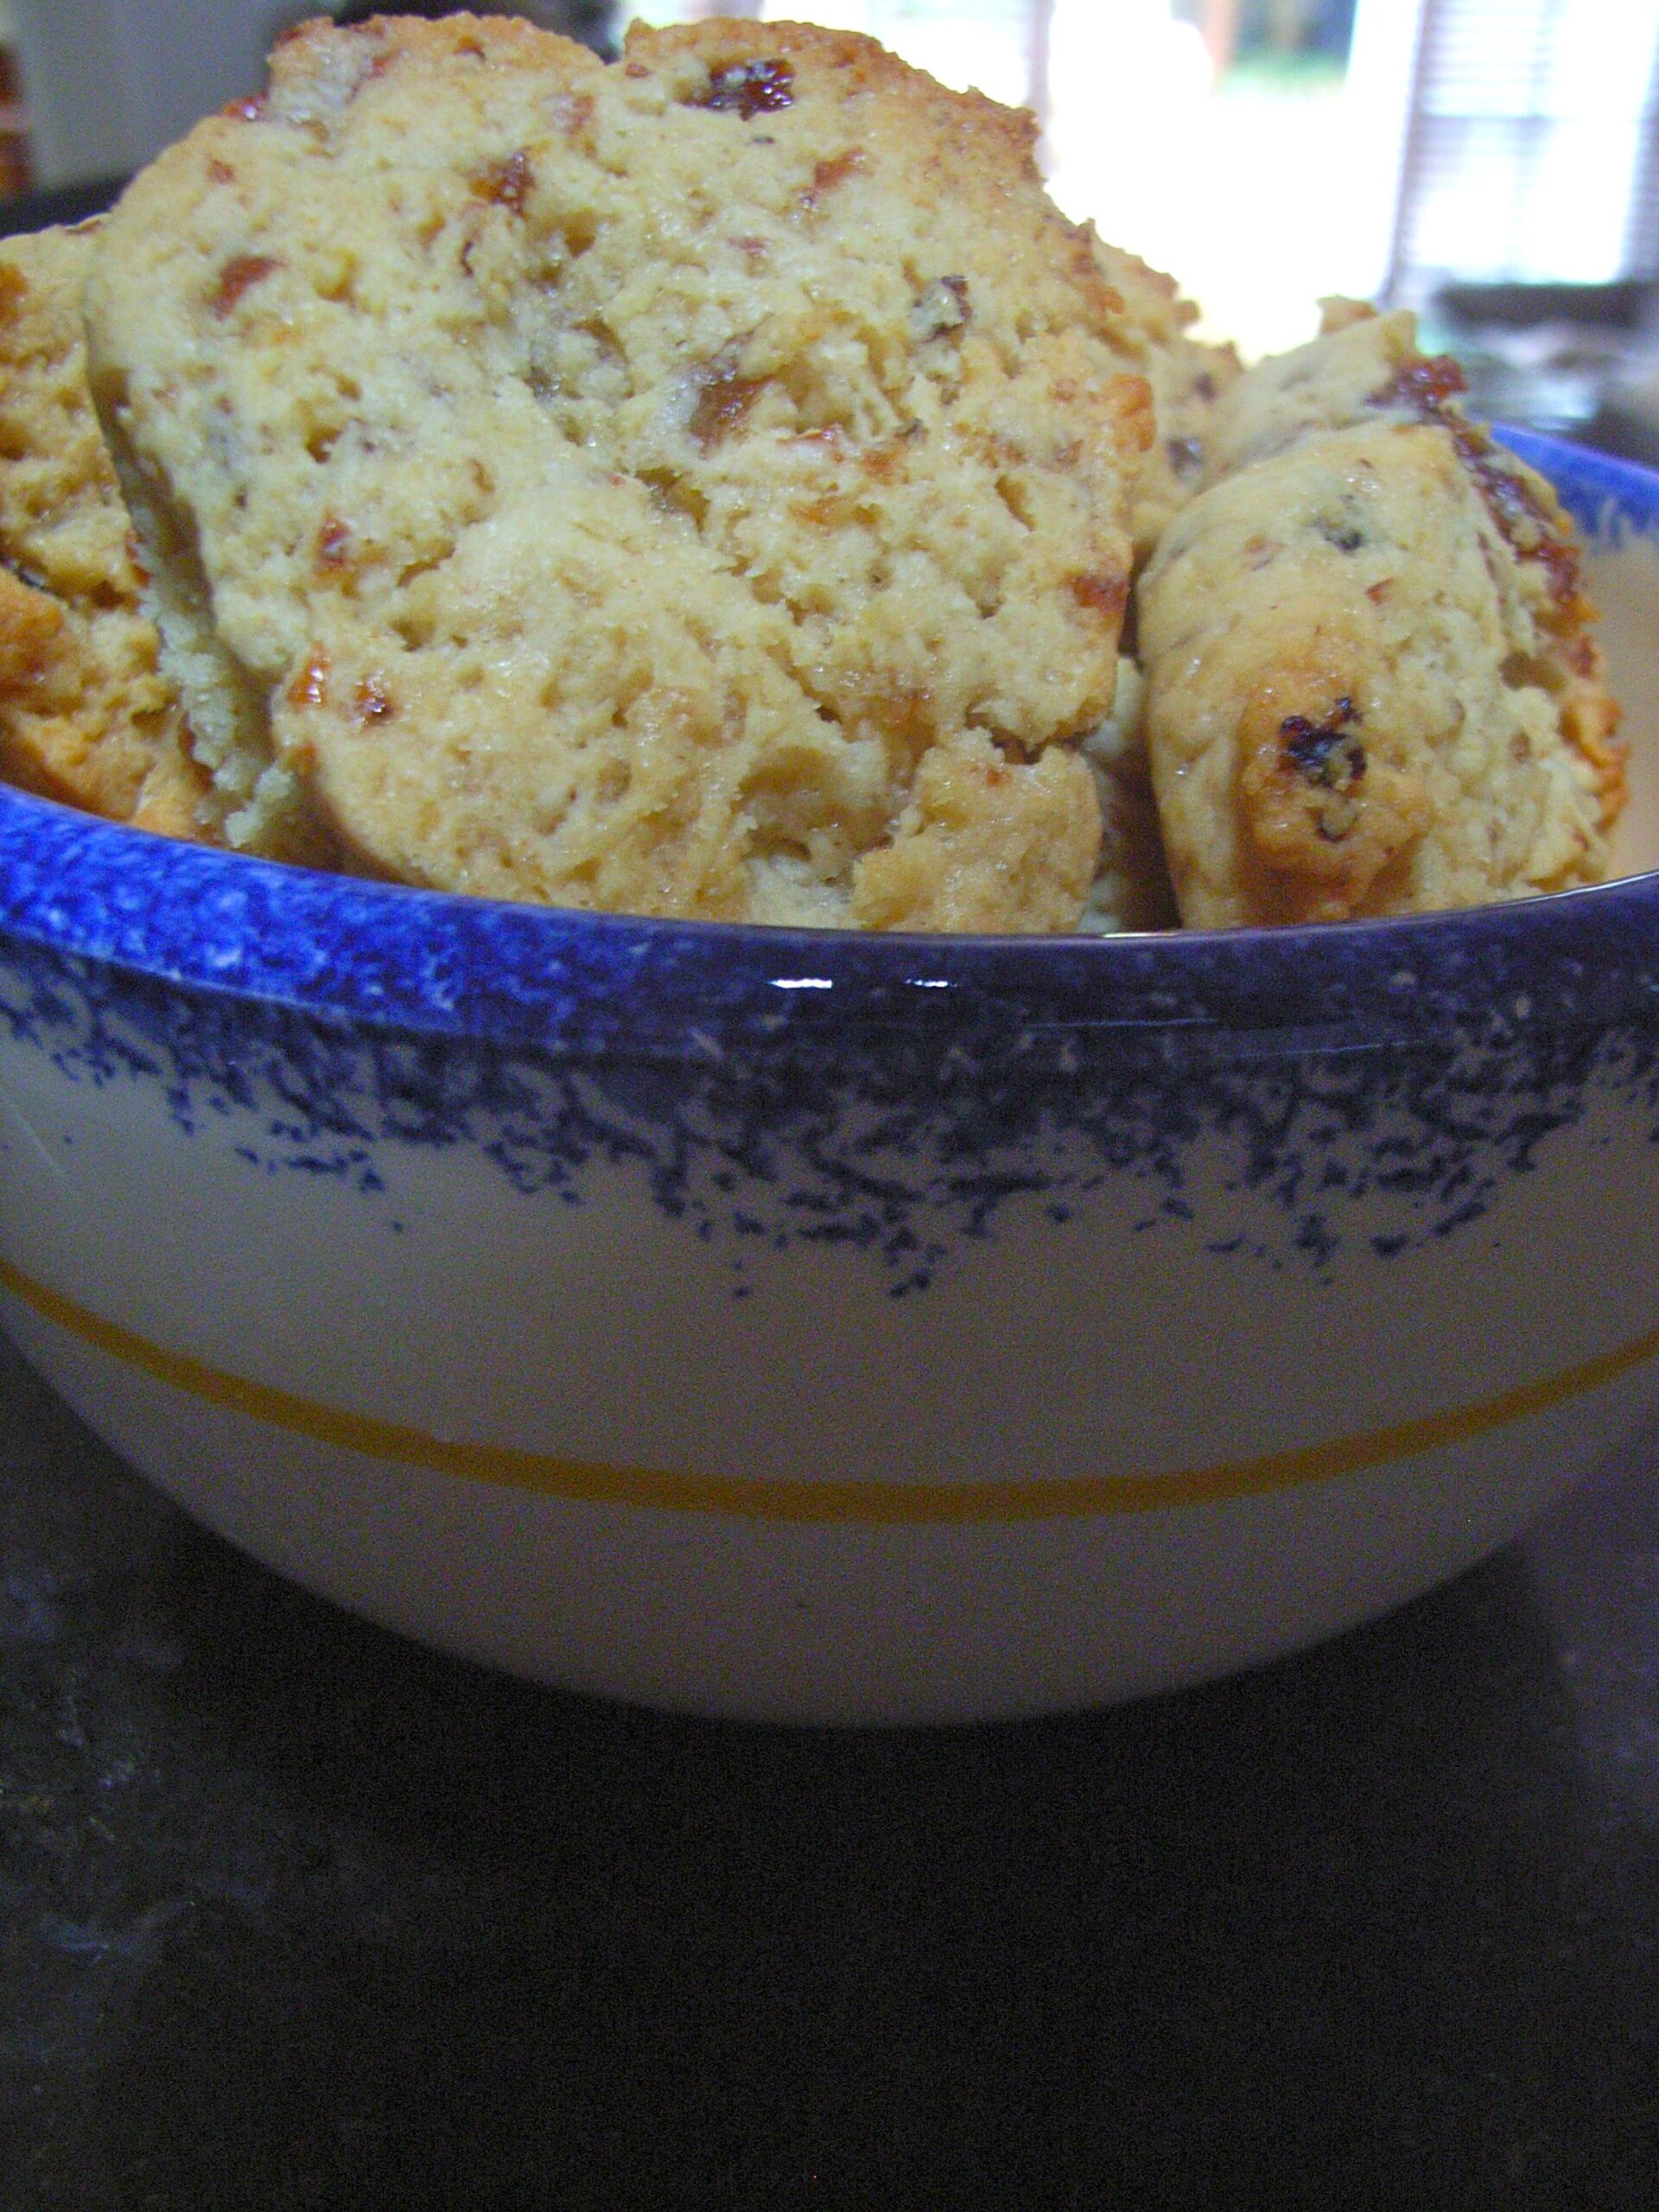  Satisfy your sweet tooth with these mincemeat cookies!